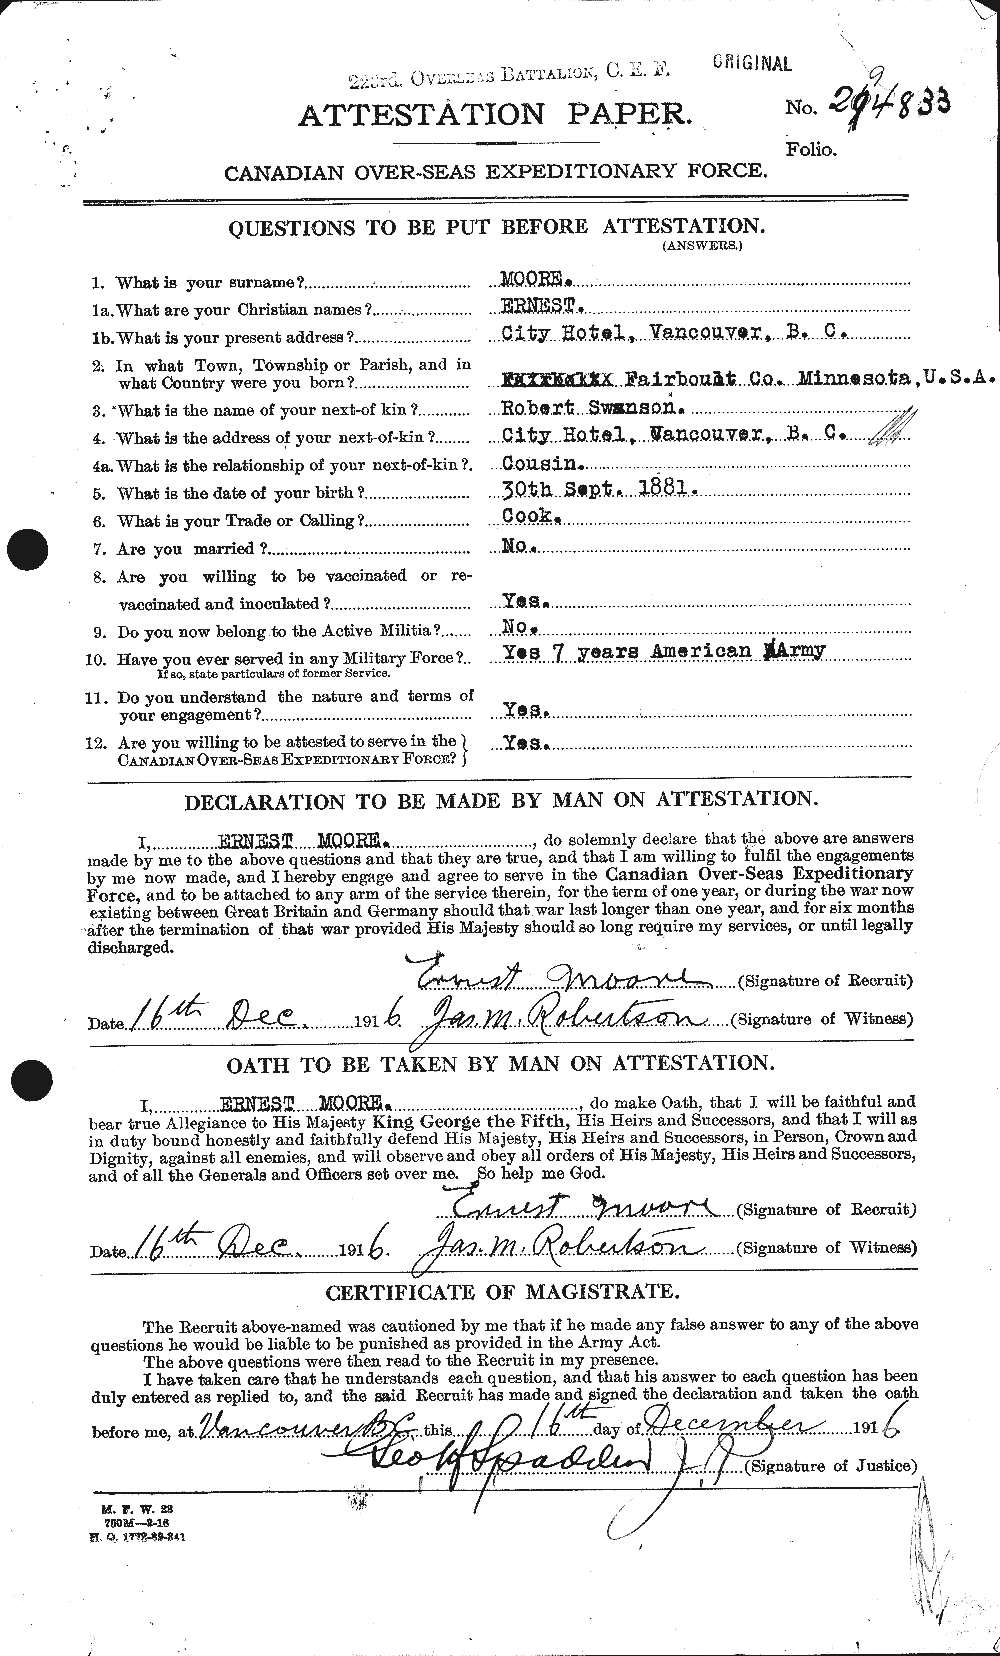 Personnel Records of the First World War - CEF 506664a